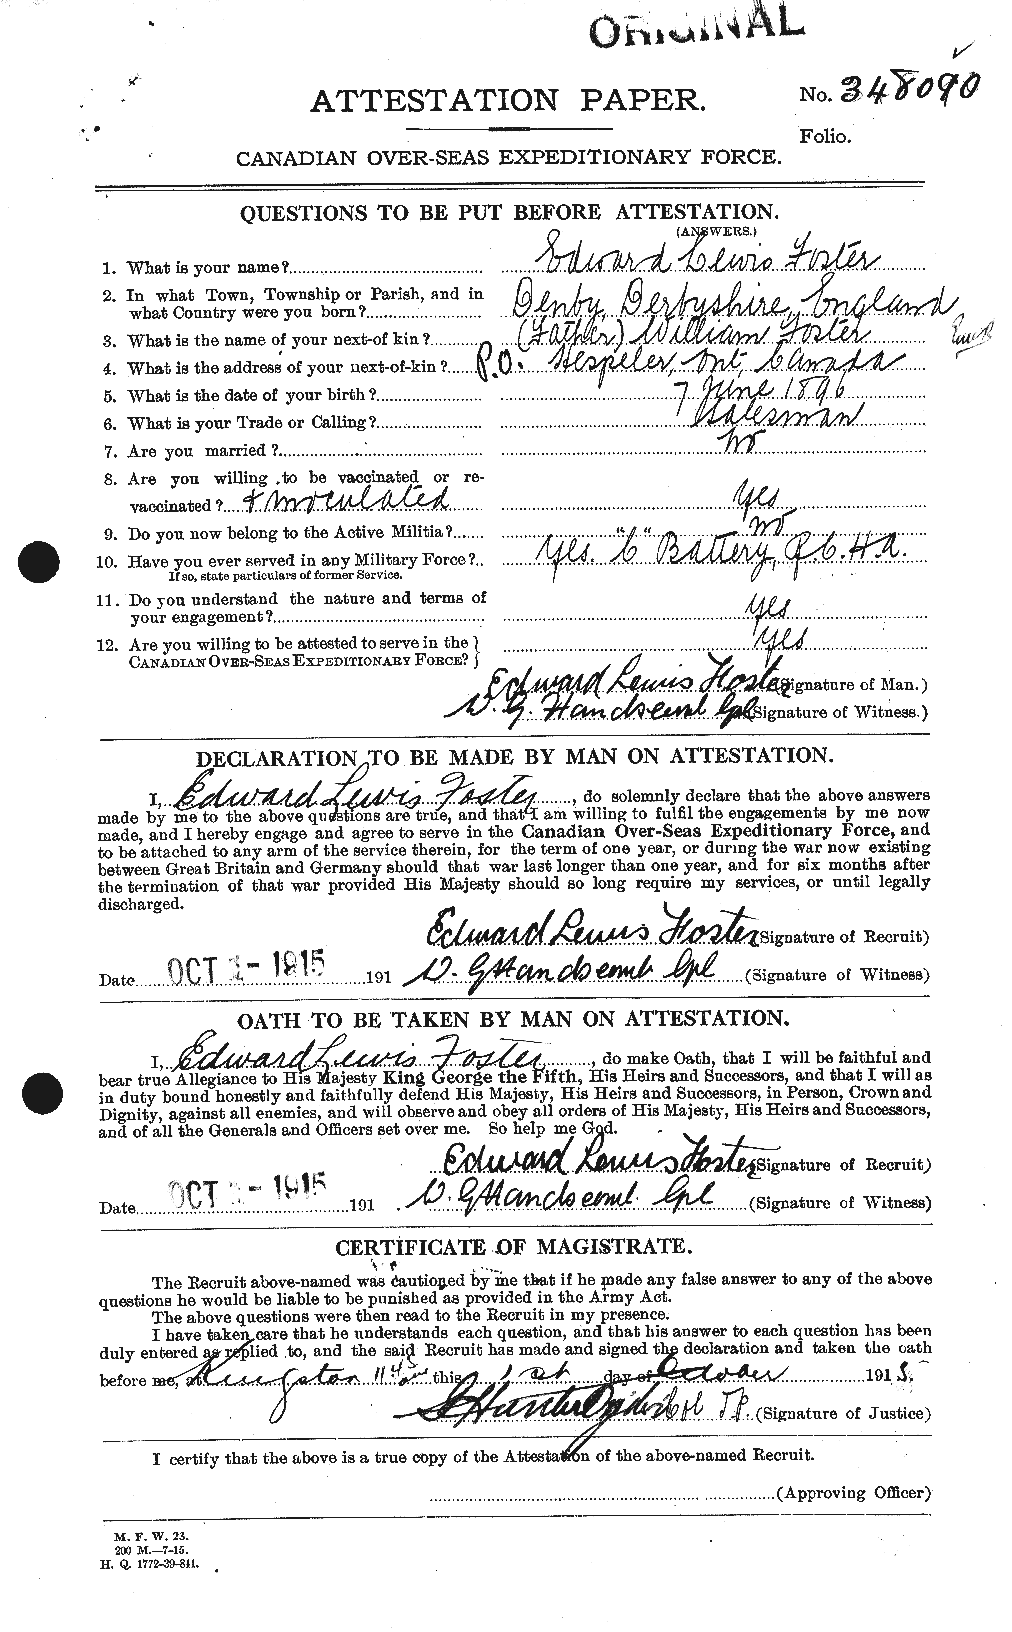 Personnel Records of the First World War - CEF 330585a